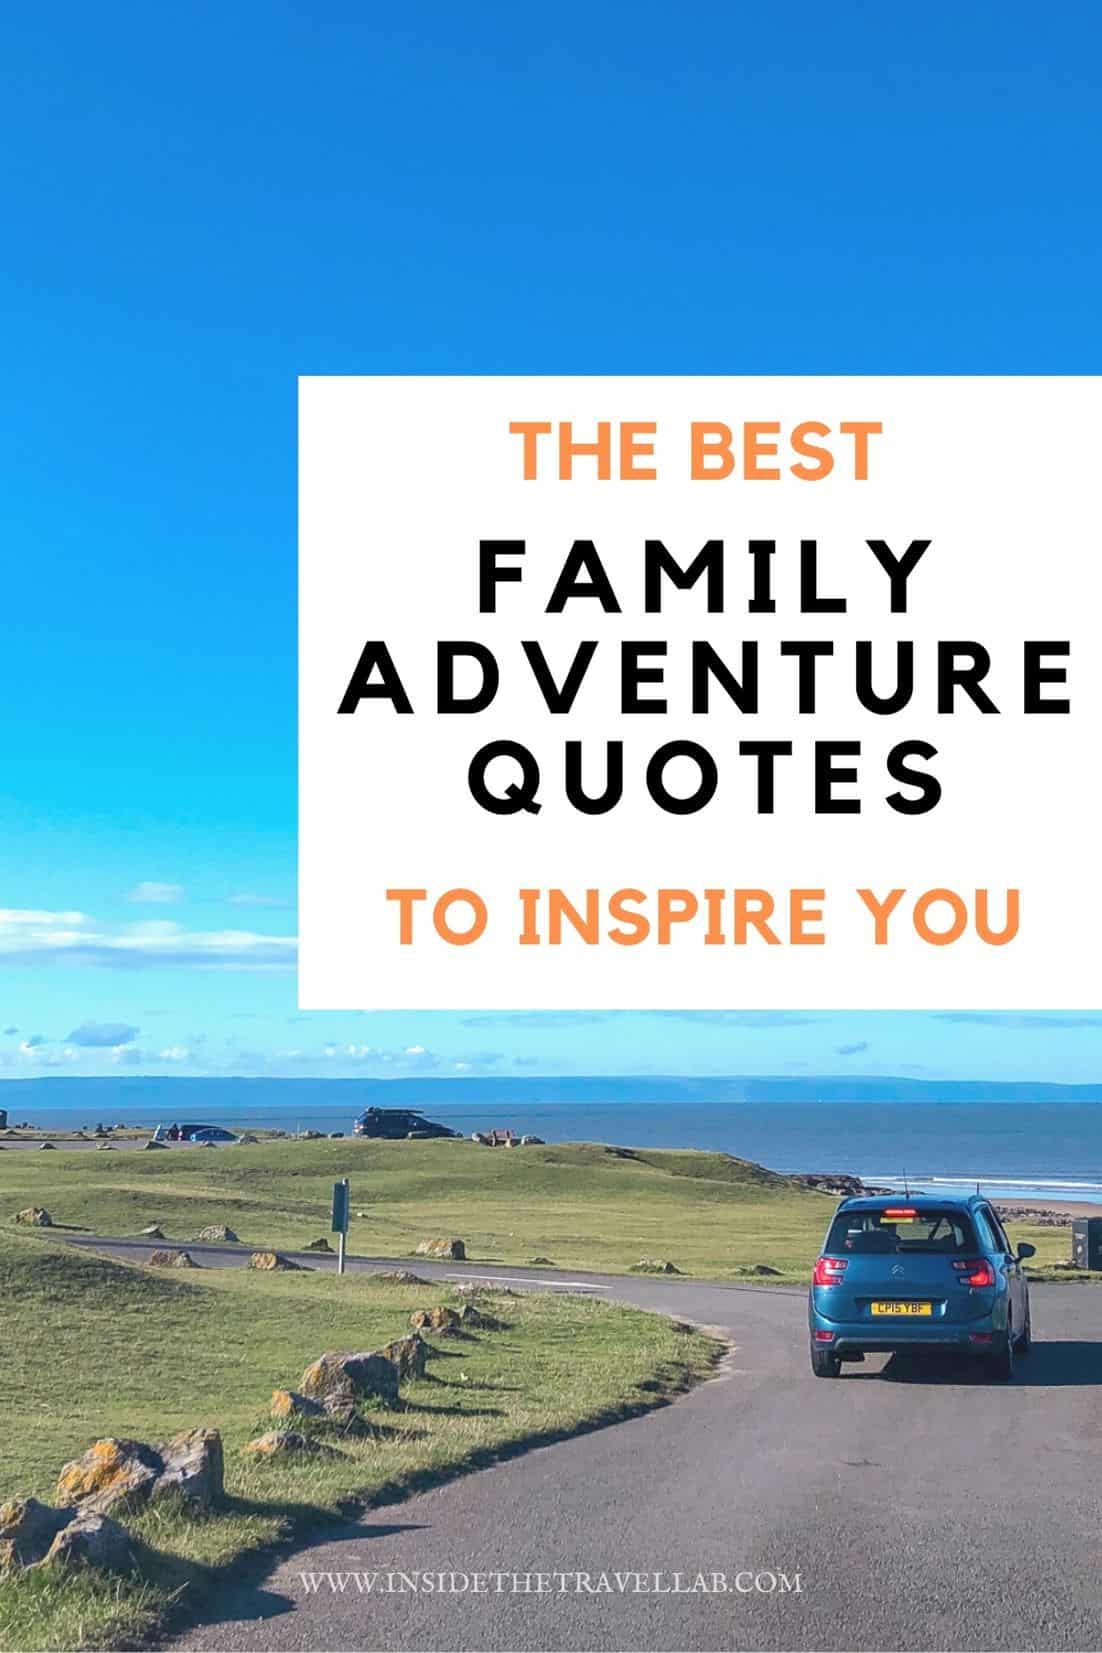 Family travel quotes cover image